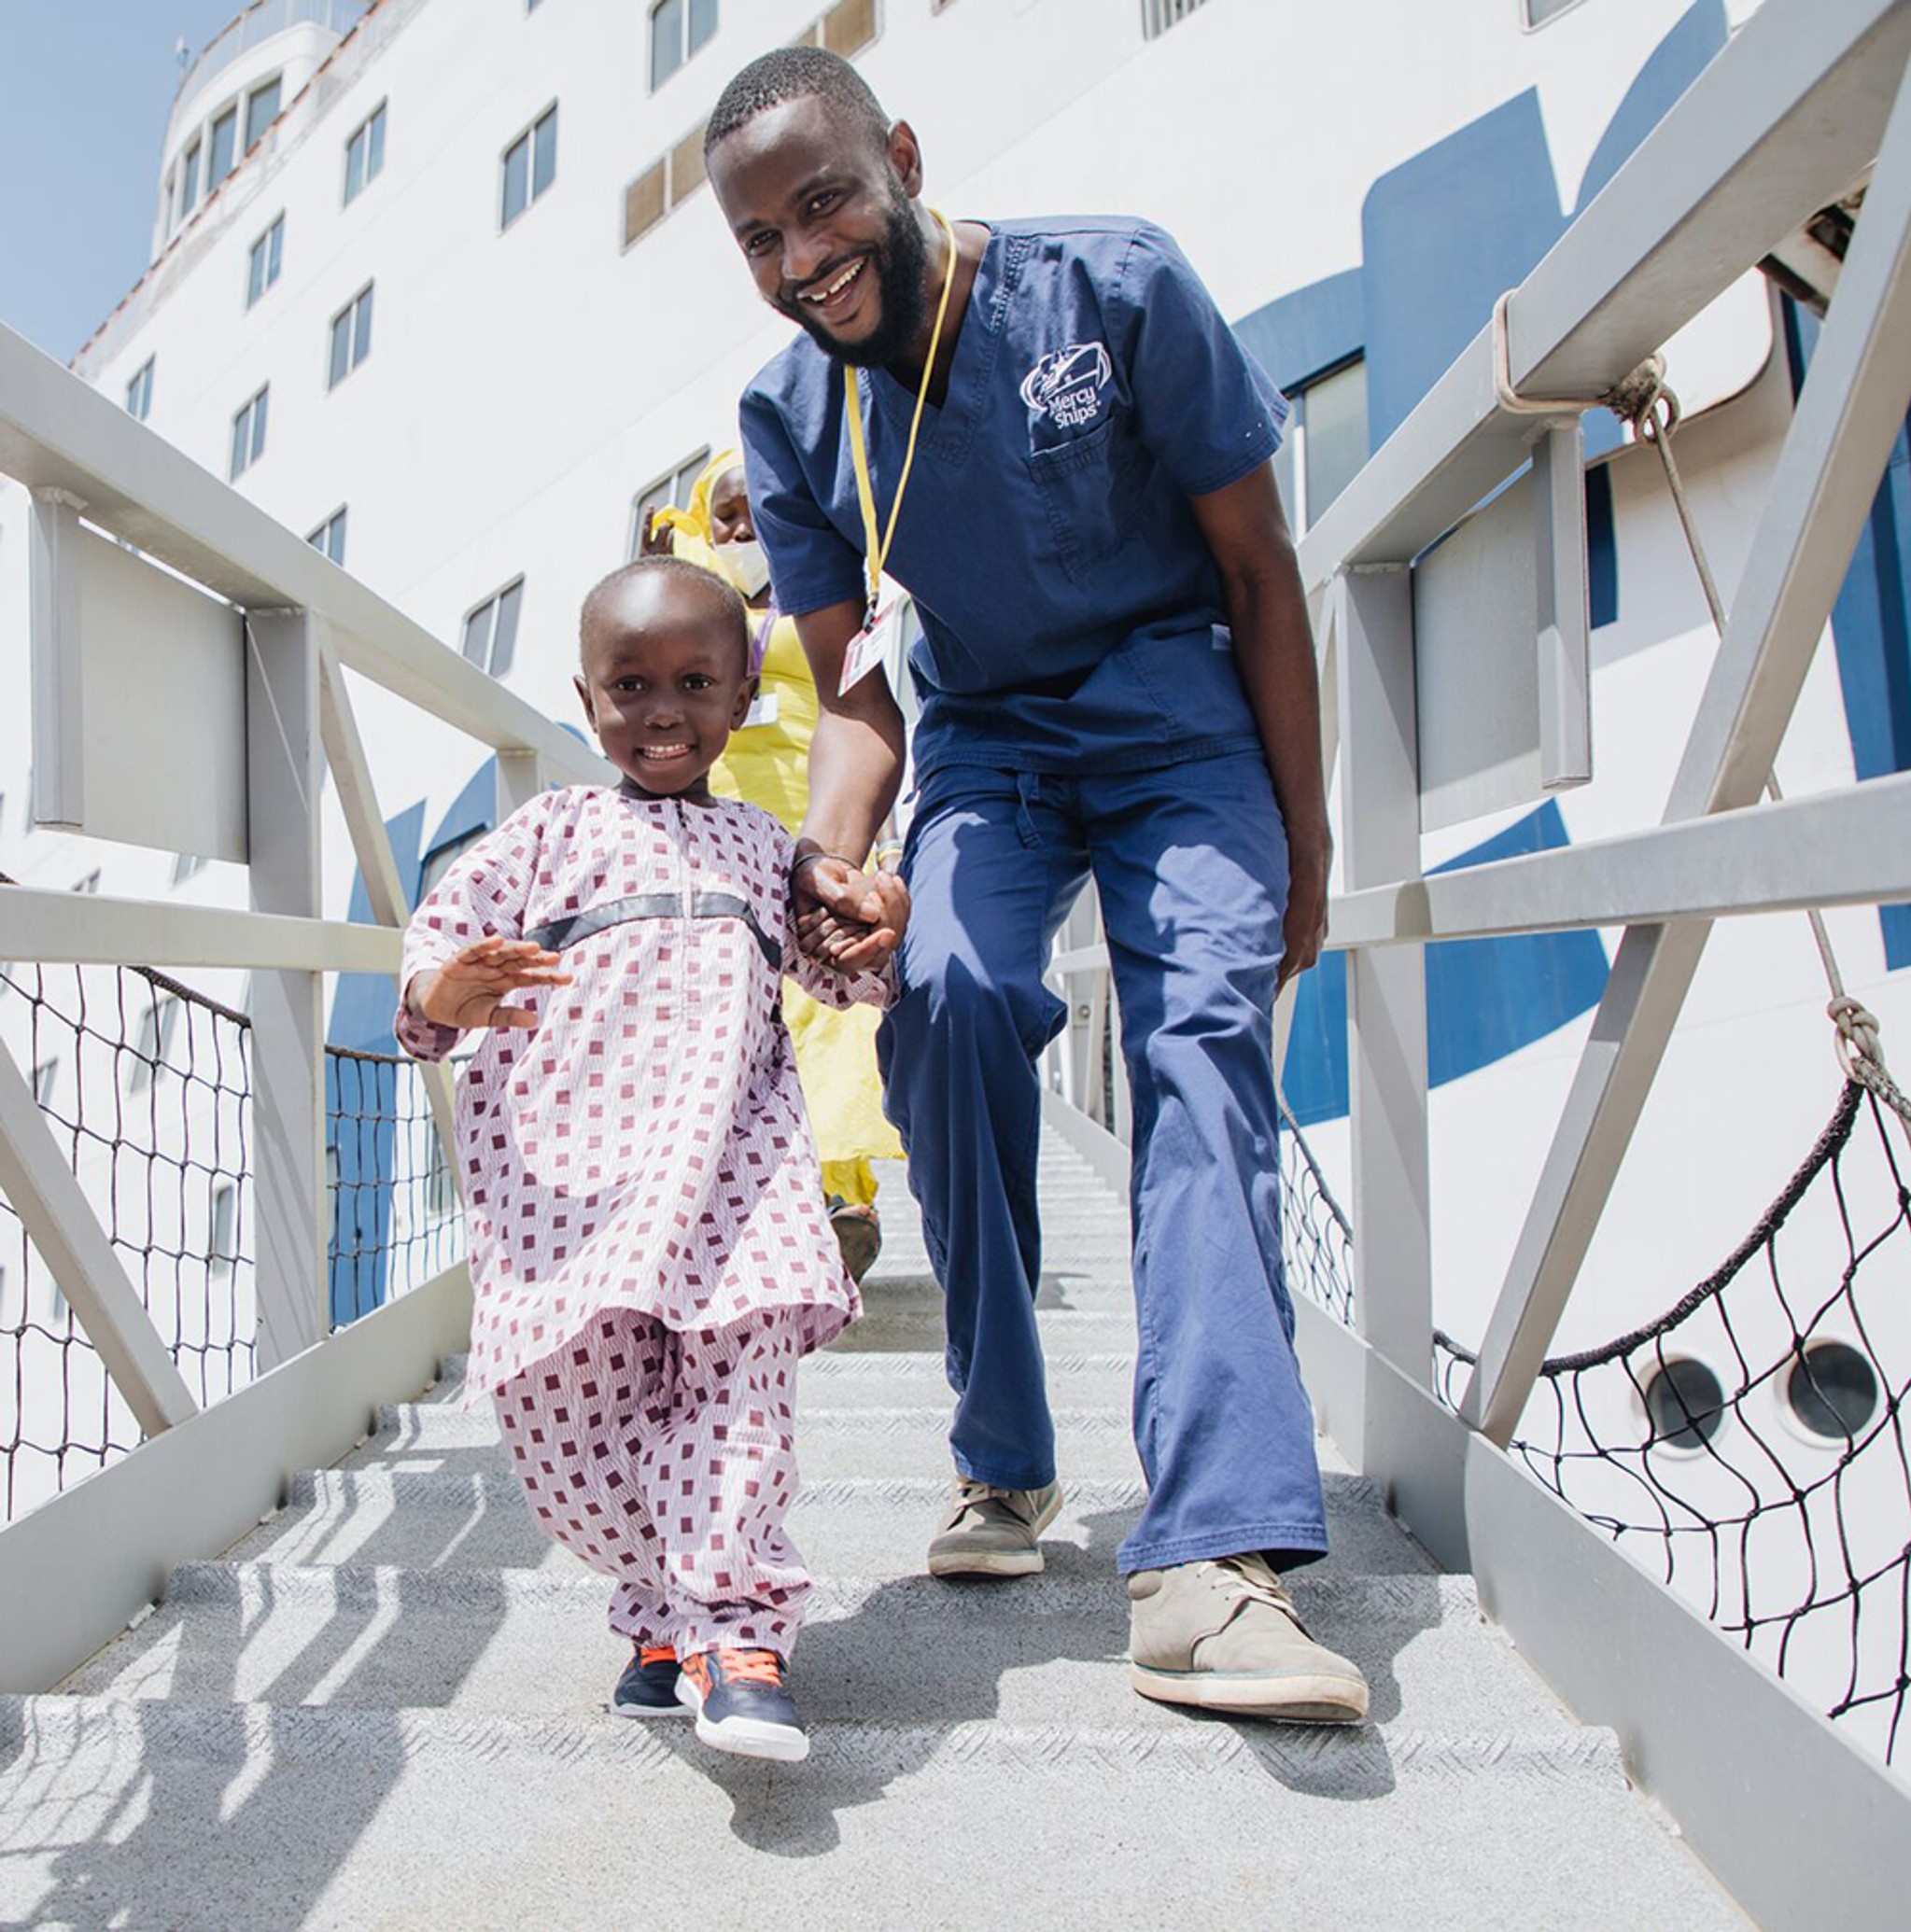 Medical professional helping small child down a walkway from a hospital ship